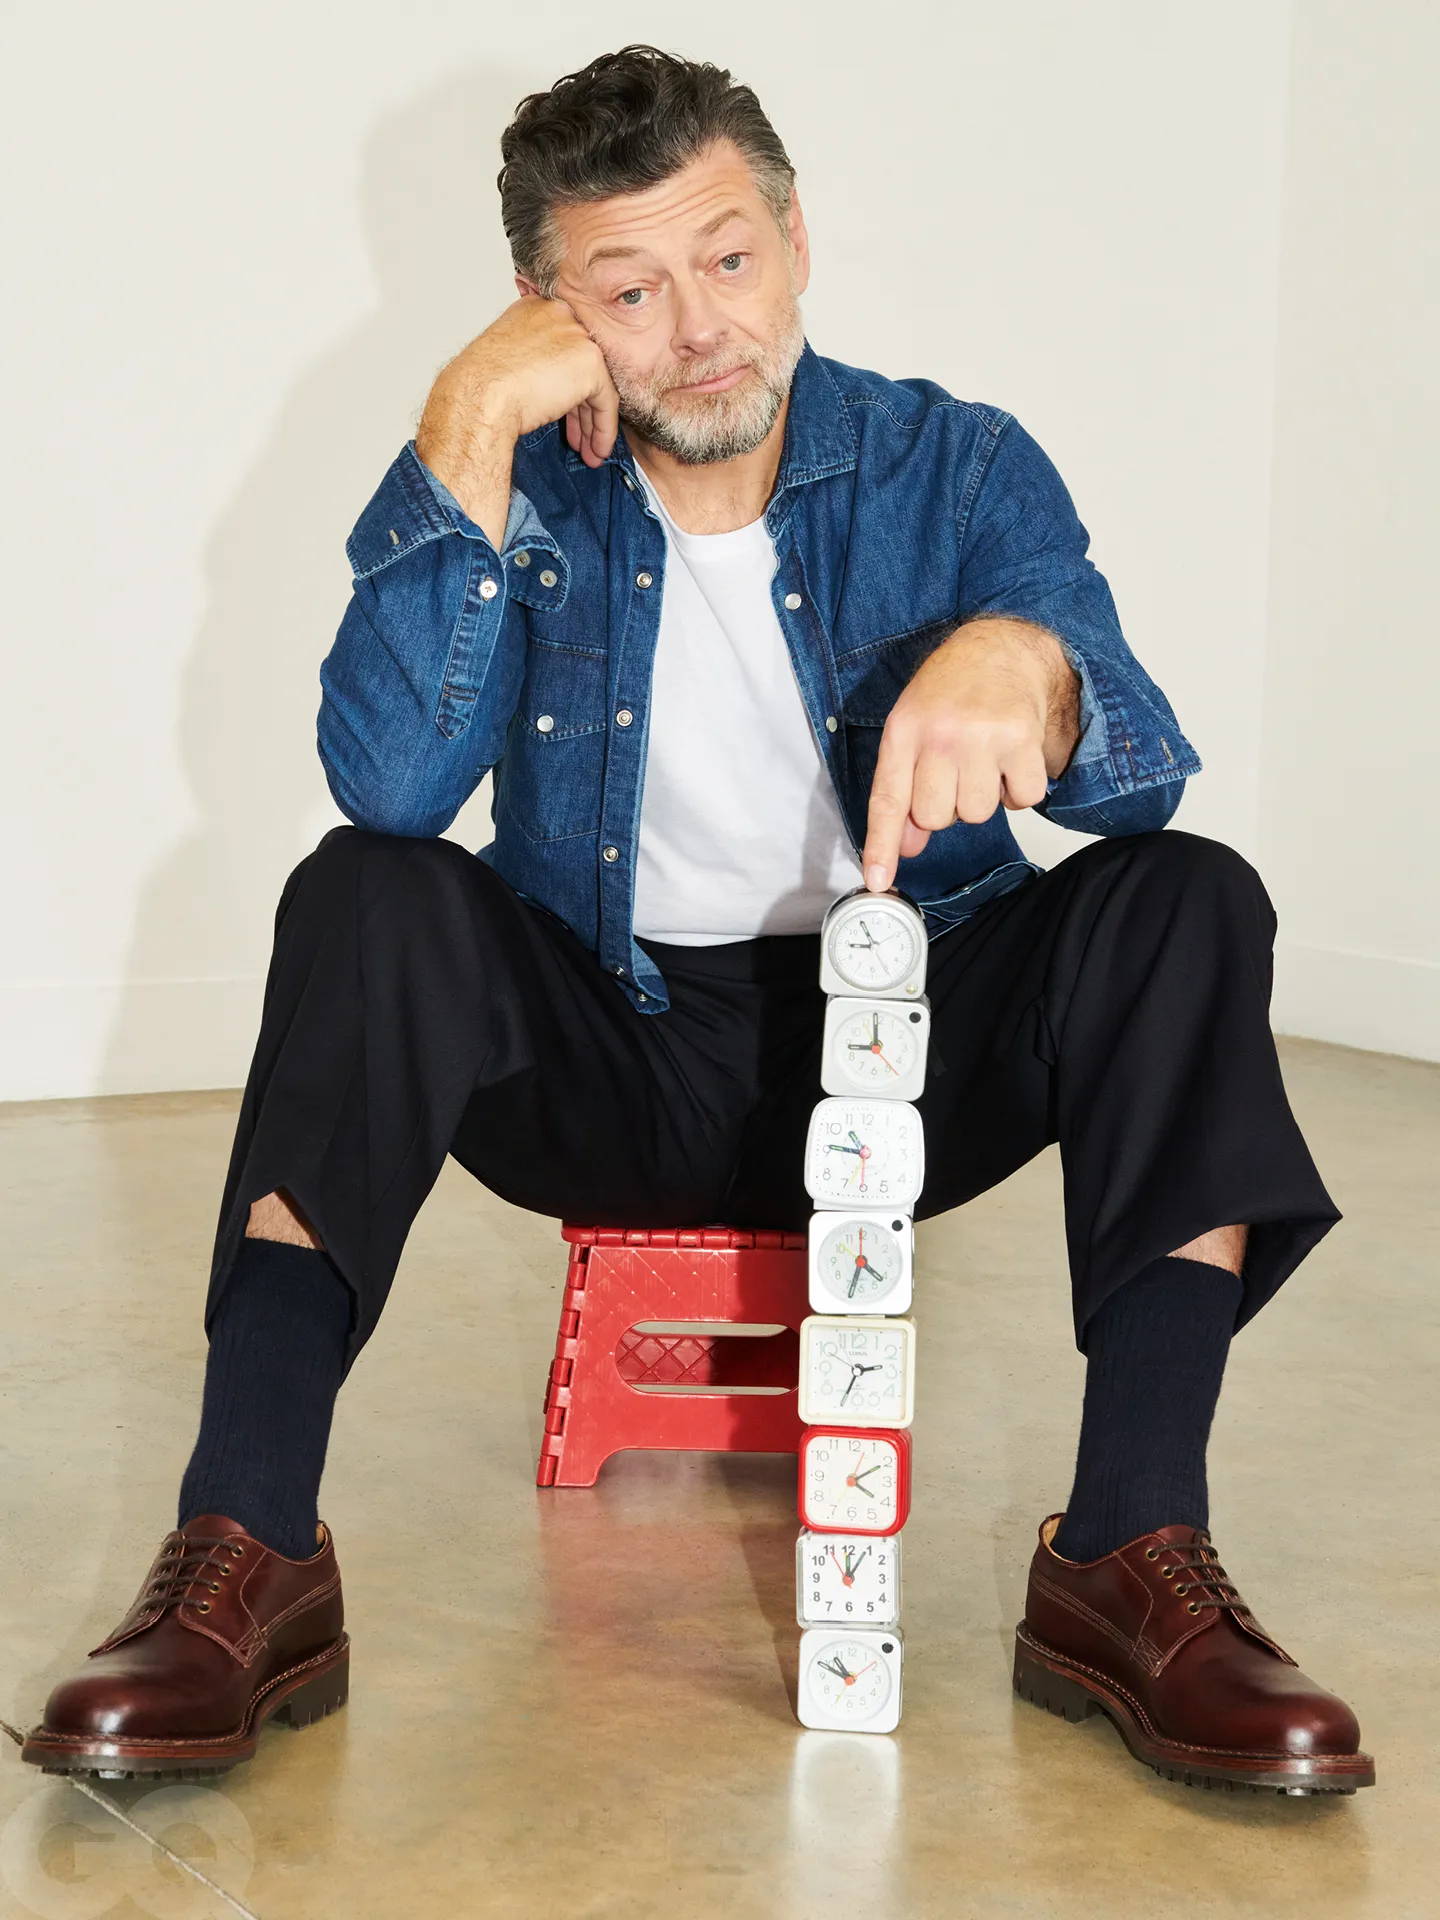 Andy Serkis in Grenson Victor. These shoes are made using a unique technique where the upper is stitched onto the welt, eliminating the gap between the upper and the sole, thus making the construction more water resistant.